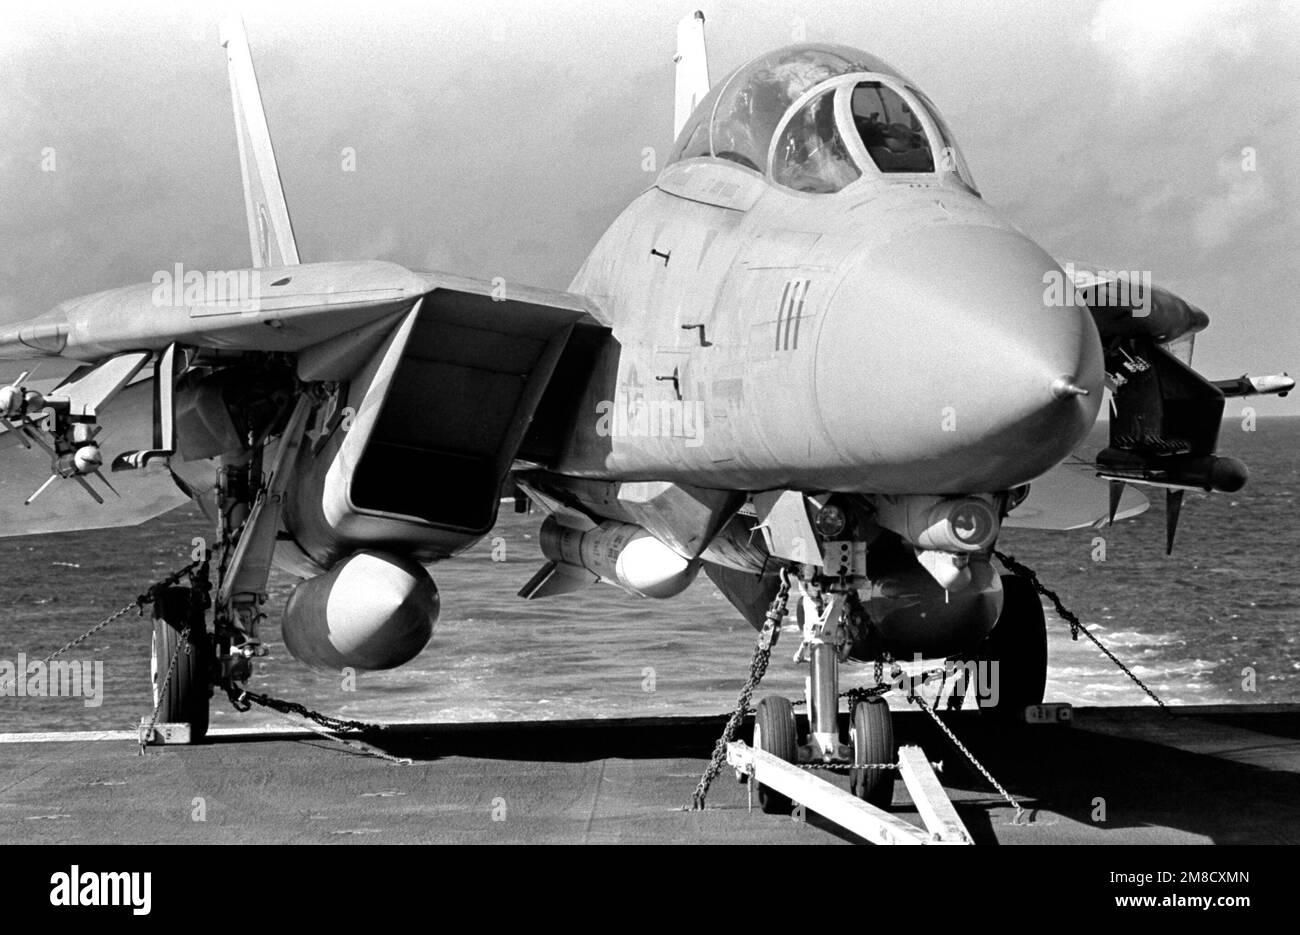 Aim 9 sidewinder missile Black and White Stock Photos & Images - Alamy